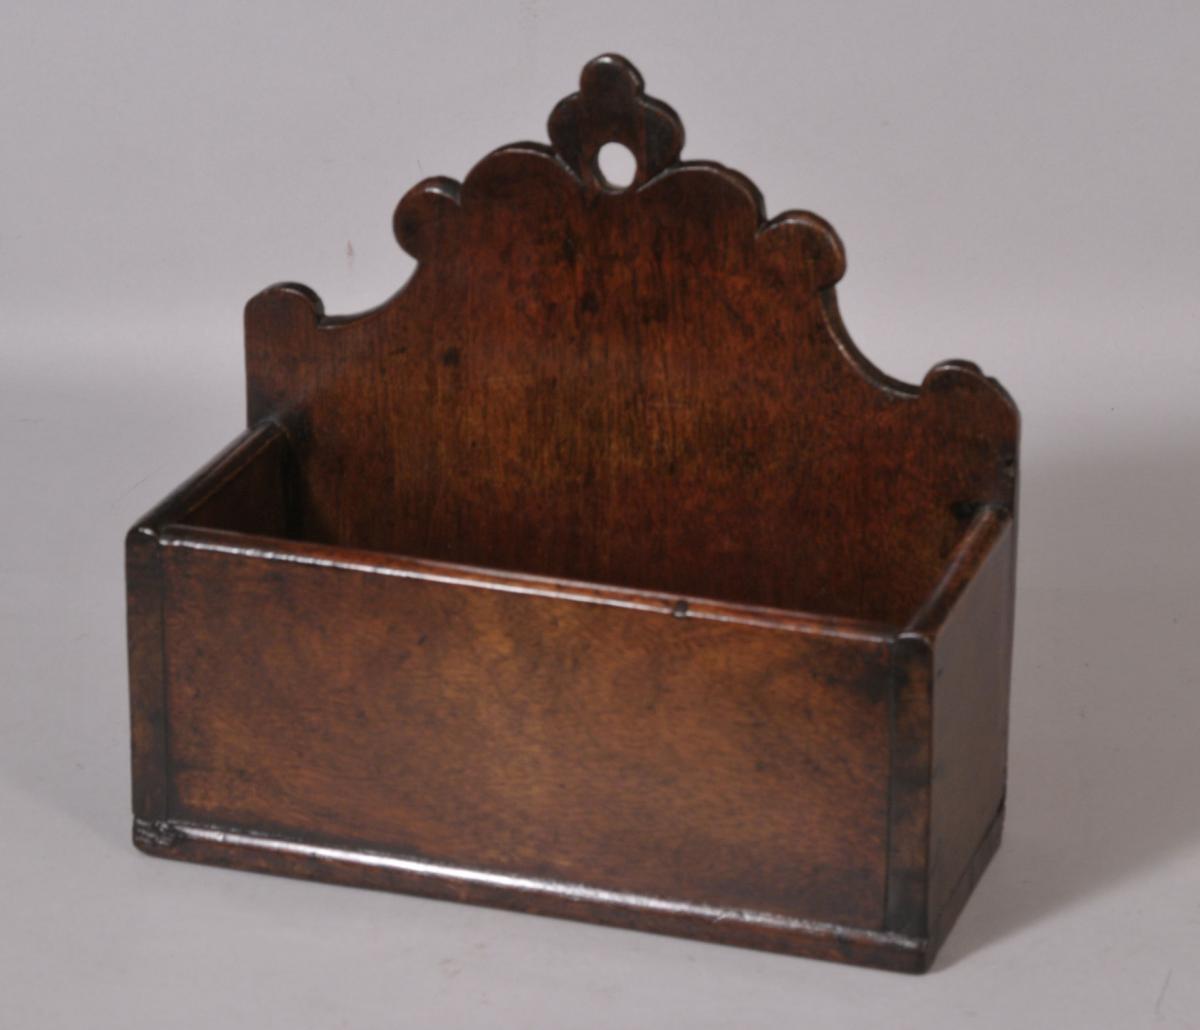 S/3149 Antique 19th Century Walnut Wall Mounted Candle Box